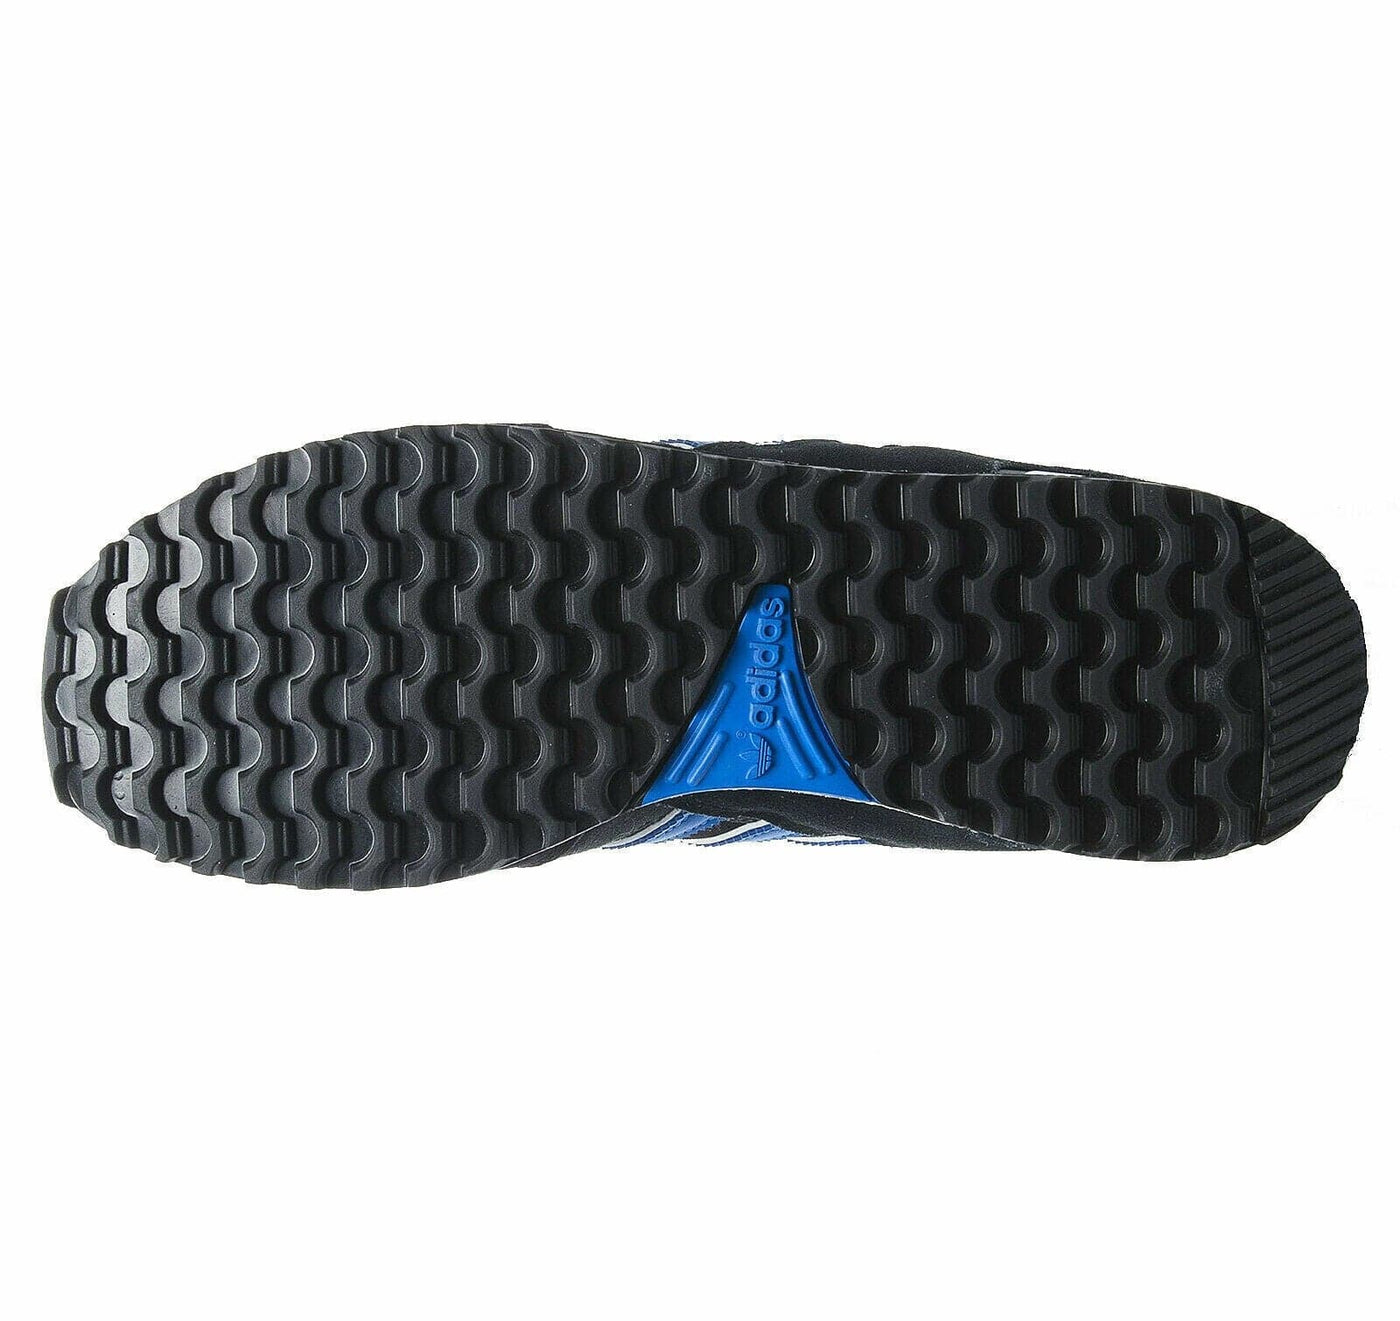 Adidas Men's ZX 750 Black/Blue Trainers **** VS4 - Big_Stock_Clearance